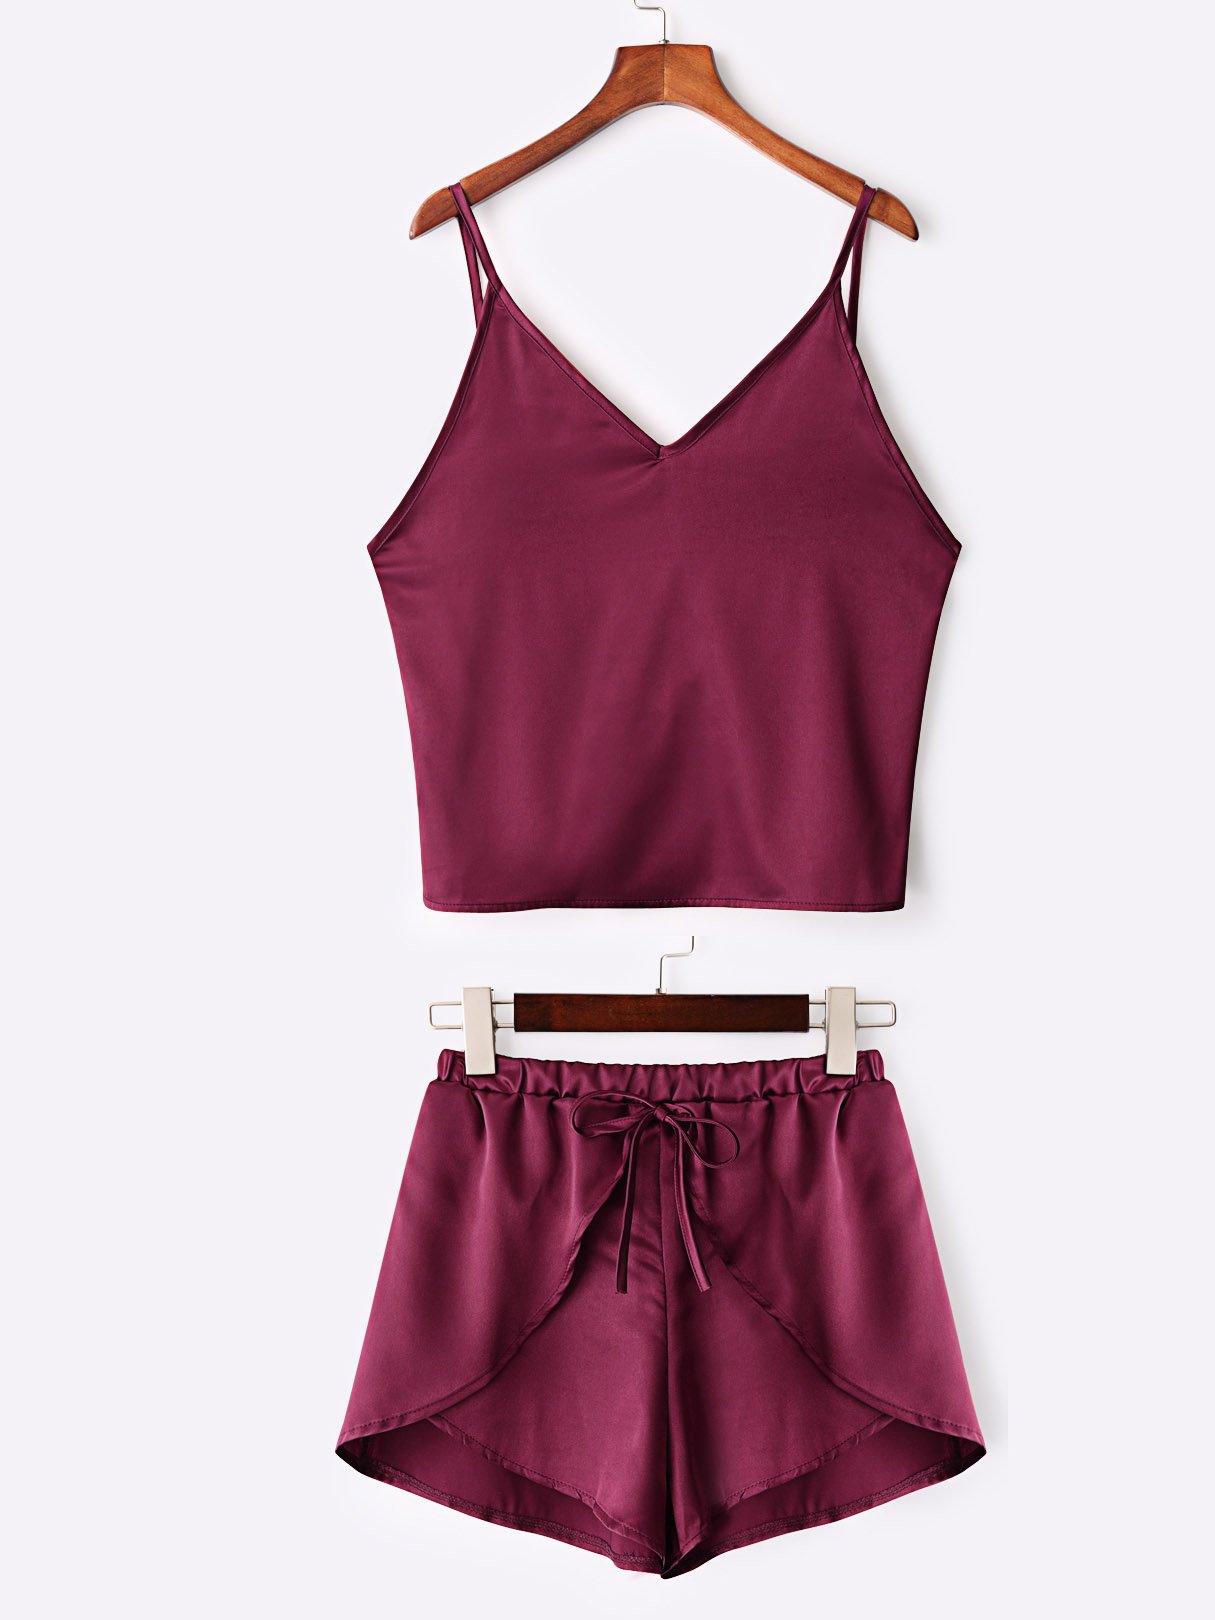 OEM Ladies Burgundy Two Piece Outfits